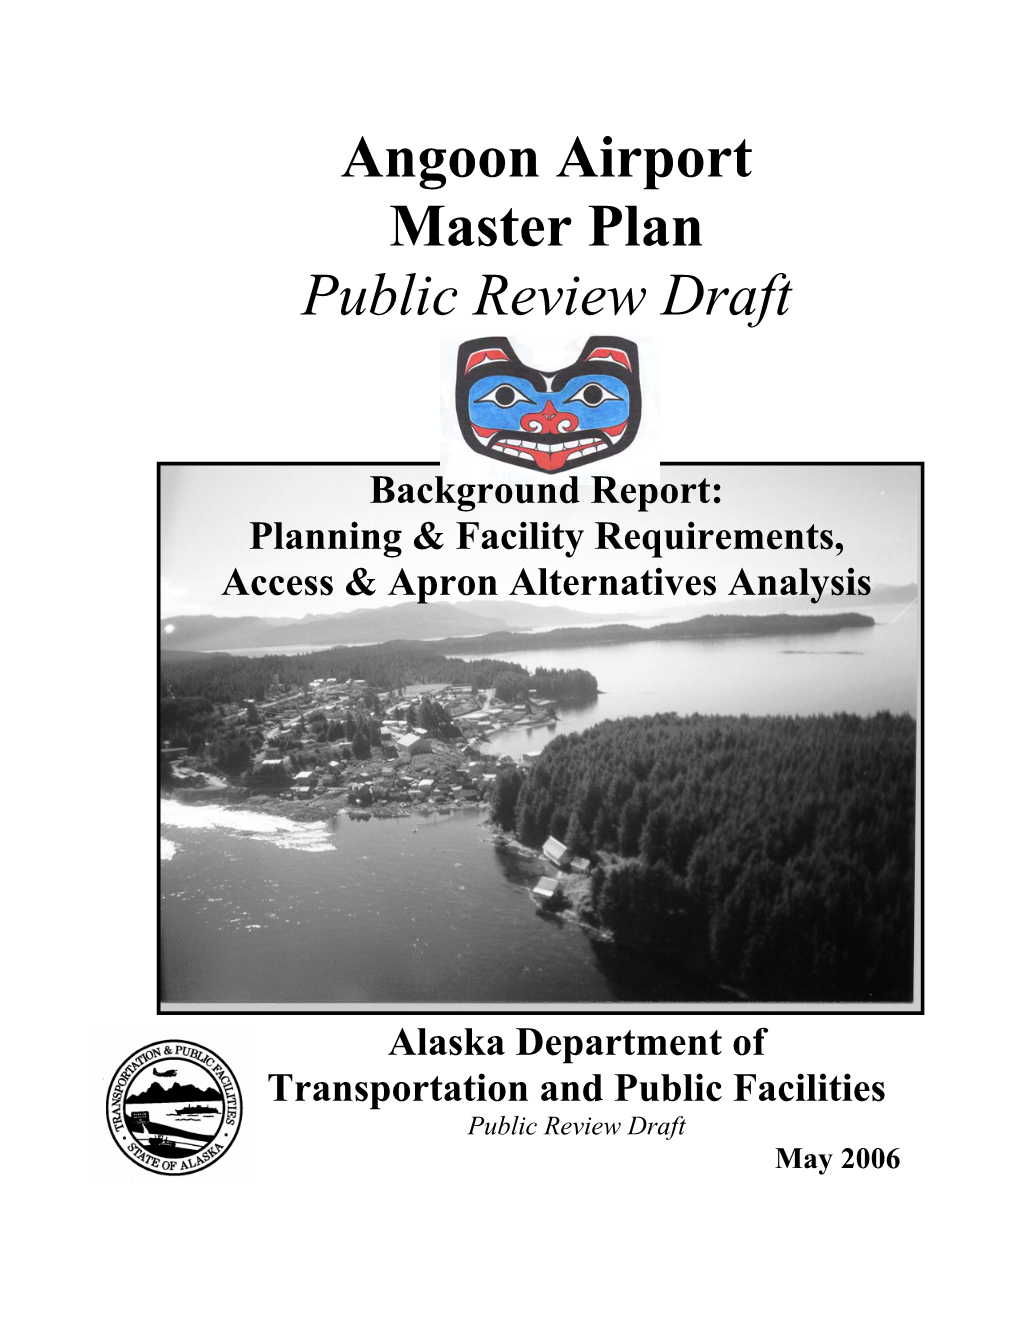 Angoon Airport Master Plan Background Report Is Divided Into Two Parts